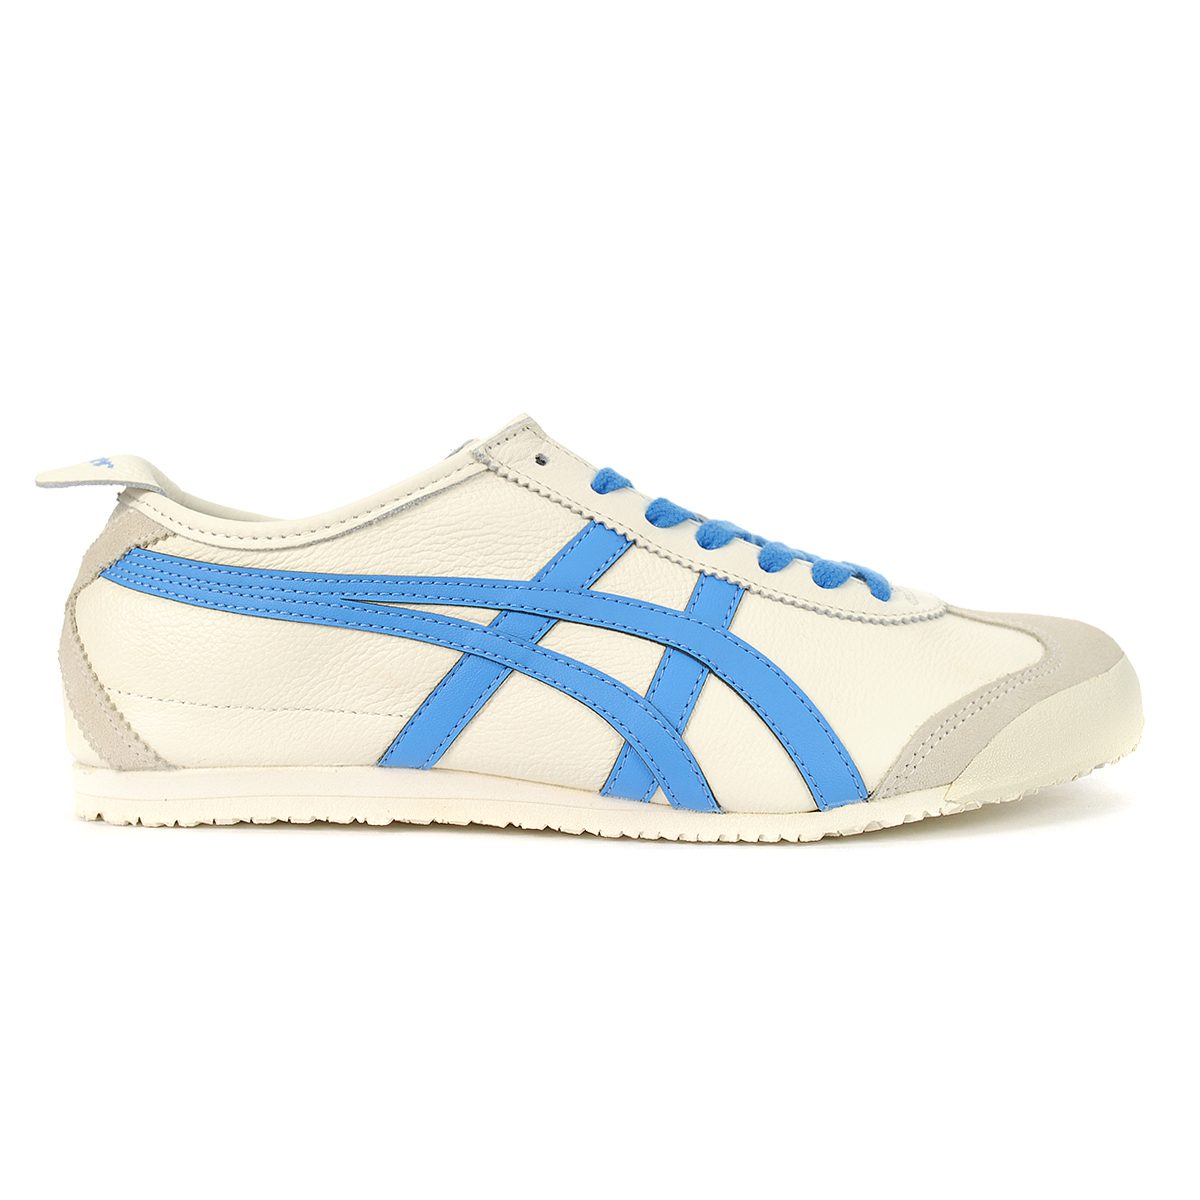 ASICS Onitsuka Tiger Mexico 66 Cream/Dolphin Blue Unisex Sneakers ...